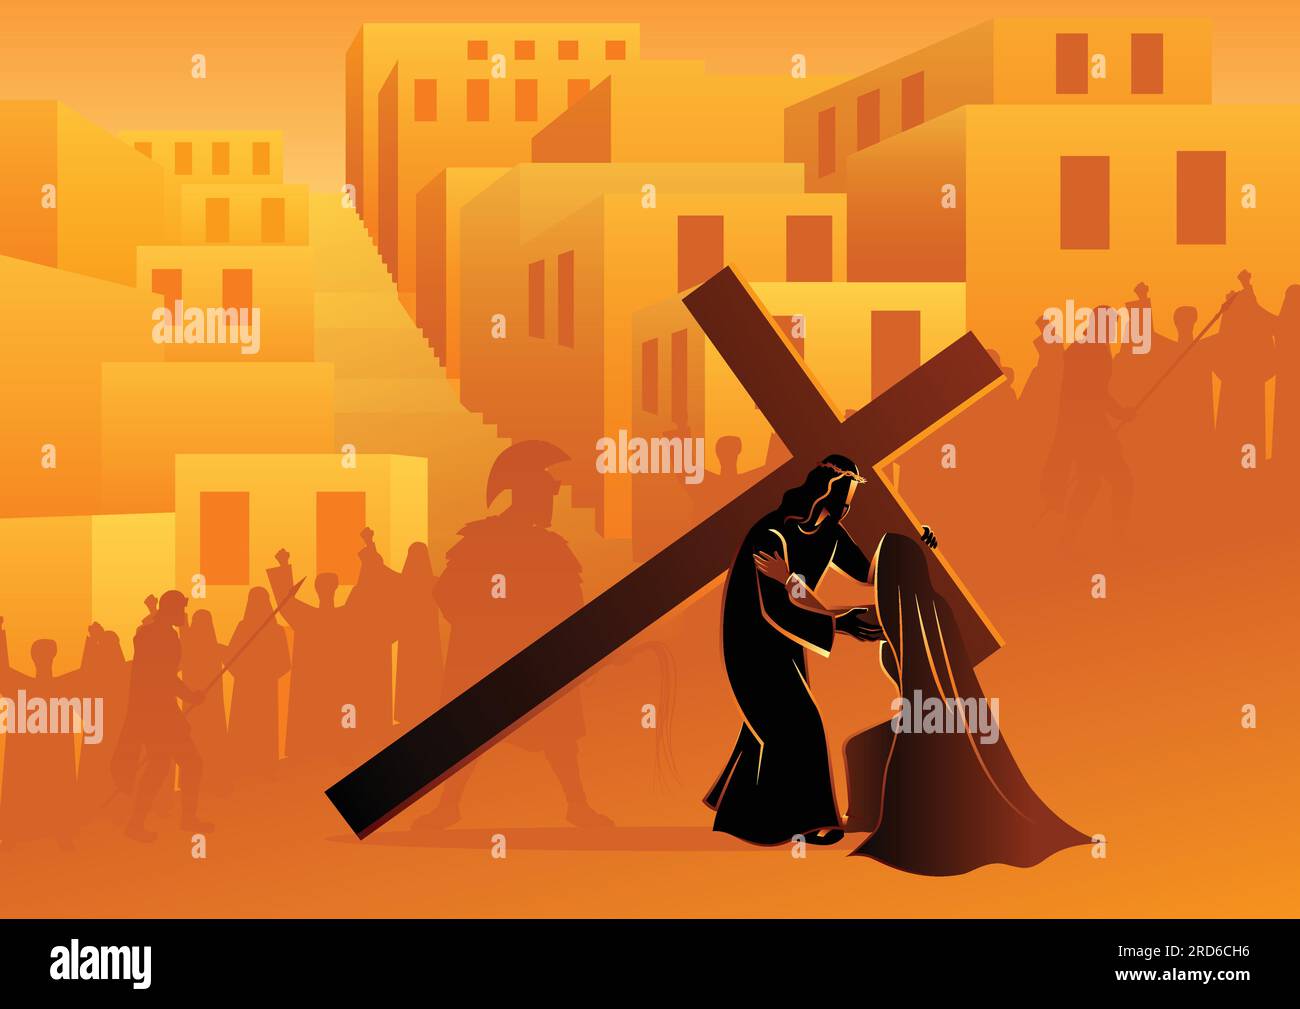 Biblical vector illustration series. Way of the Cross or Stations of the Cross, fourth station, Jesus Meets His Blessed Mother, Mary. Stock Vector